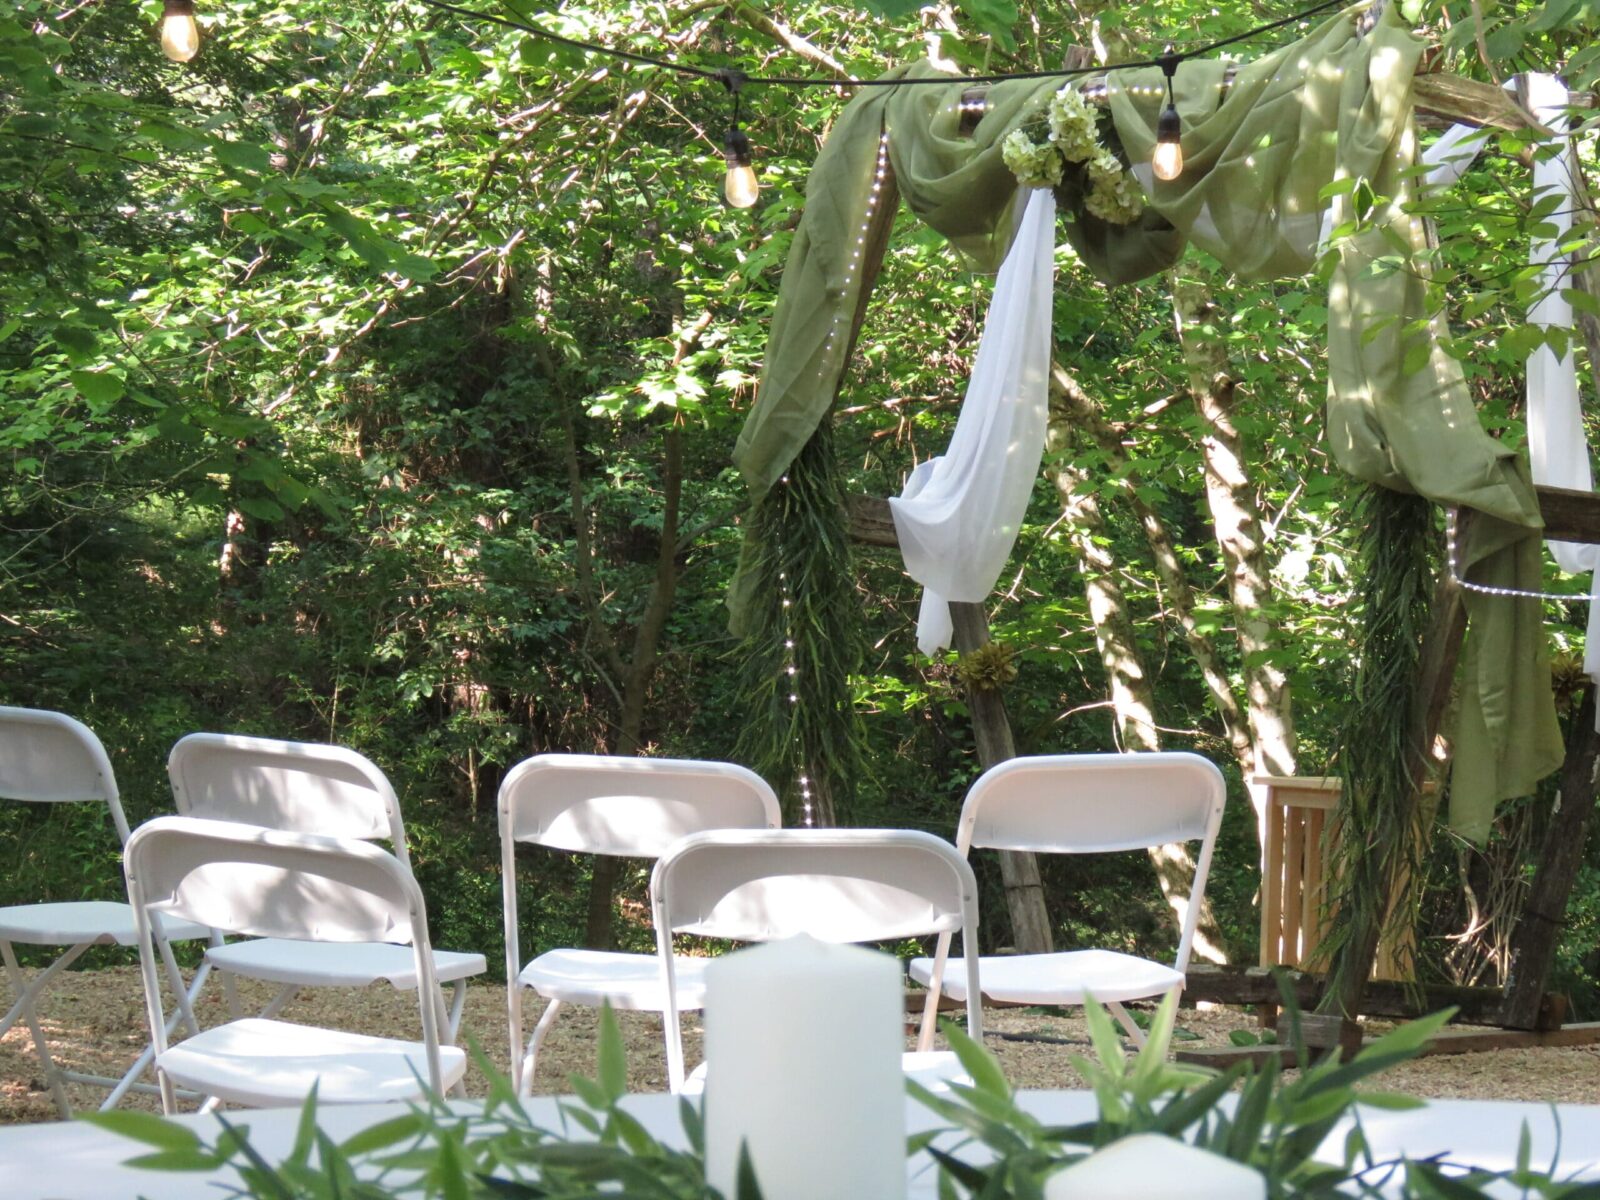 rustic wedding arch decorated in drapes of white and green and green flowers with pine trees in the background